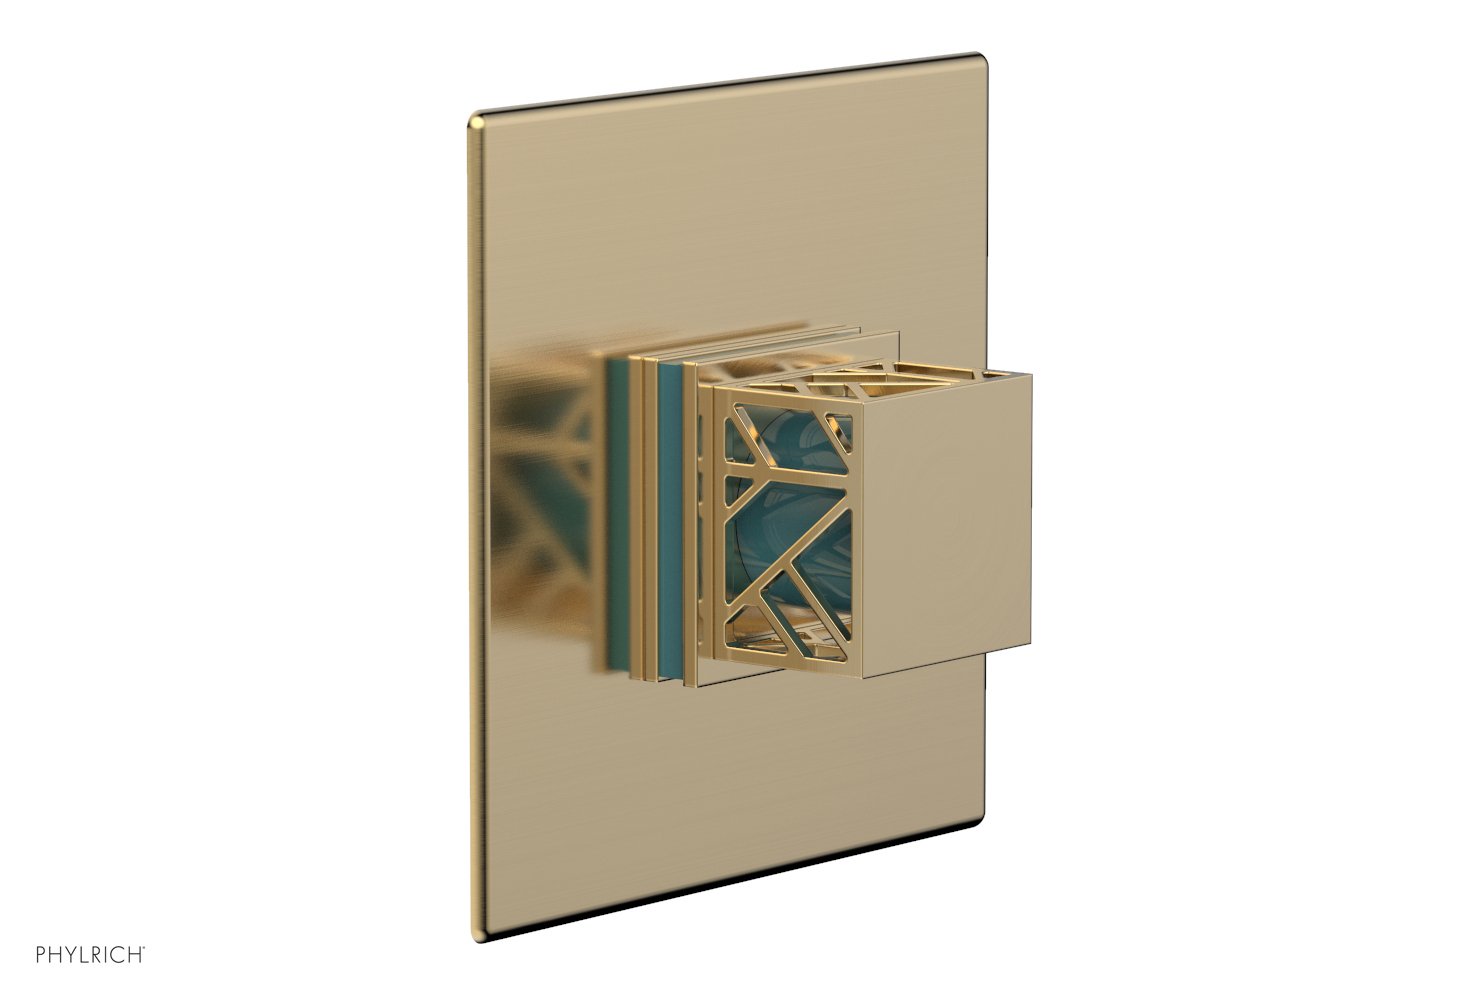 Phylrich JOLIE Pressure Balance Shower Plate & Handle Trim, Square Handle with "Turquoise" Accents